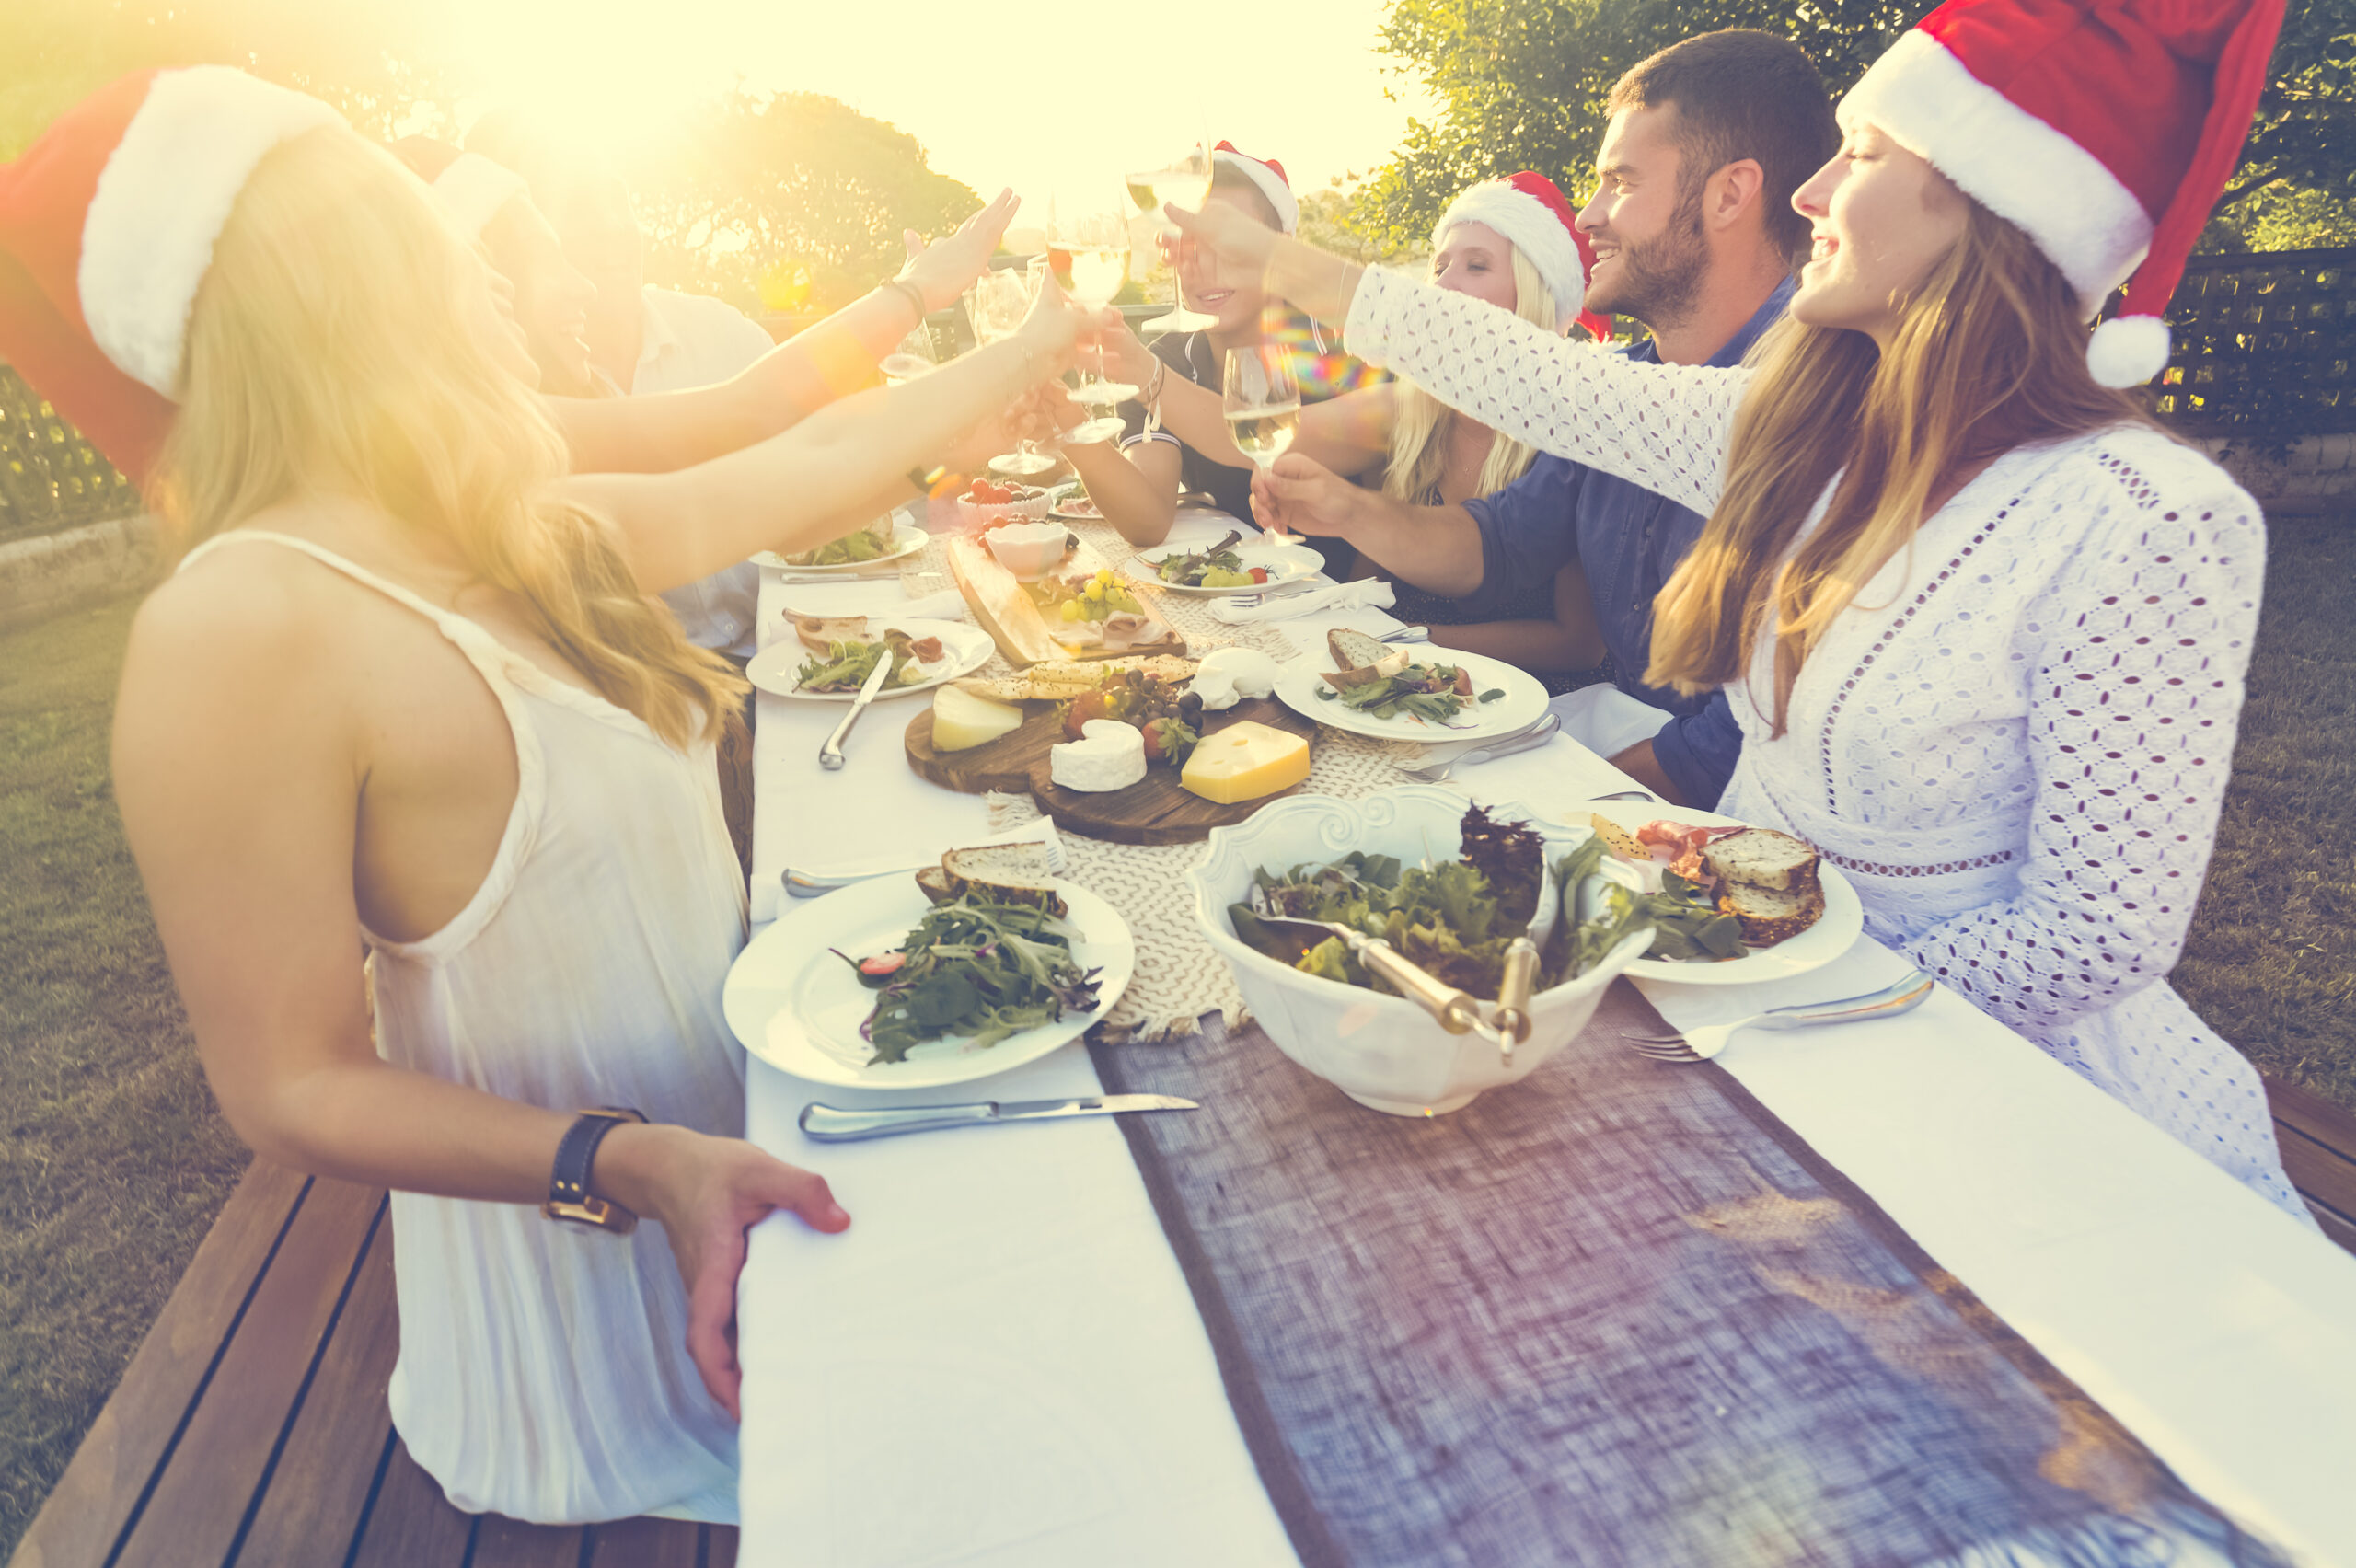 How to host a healthy party